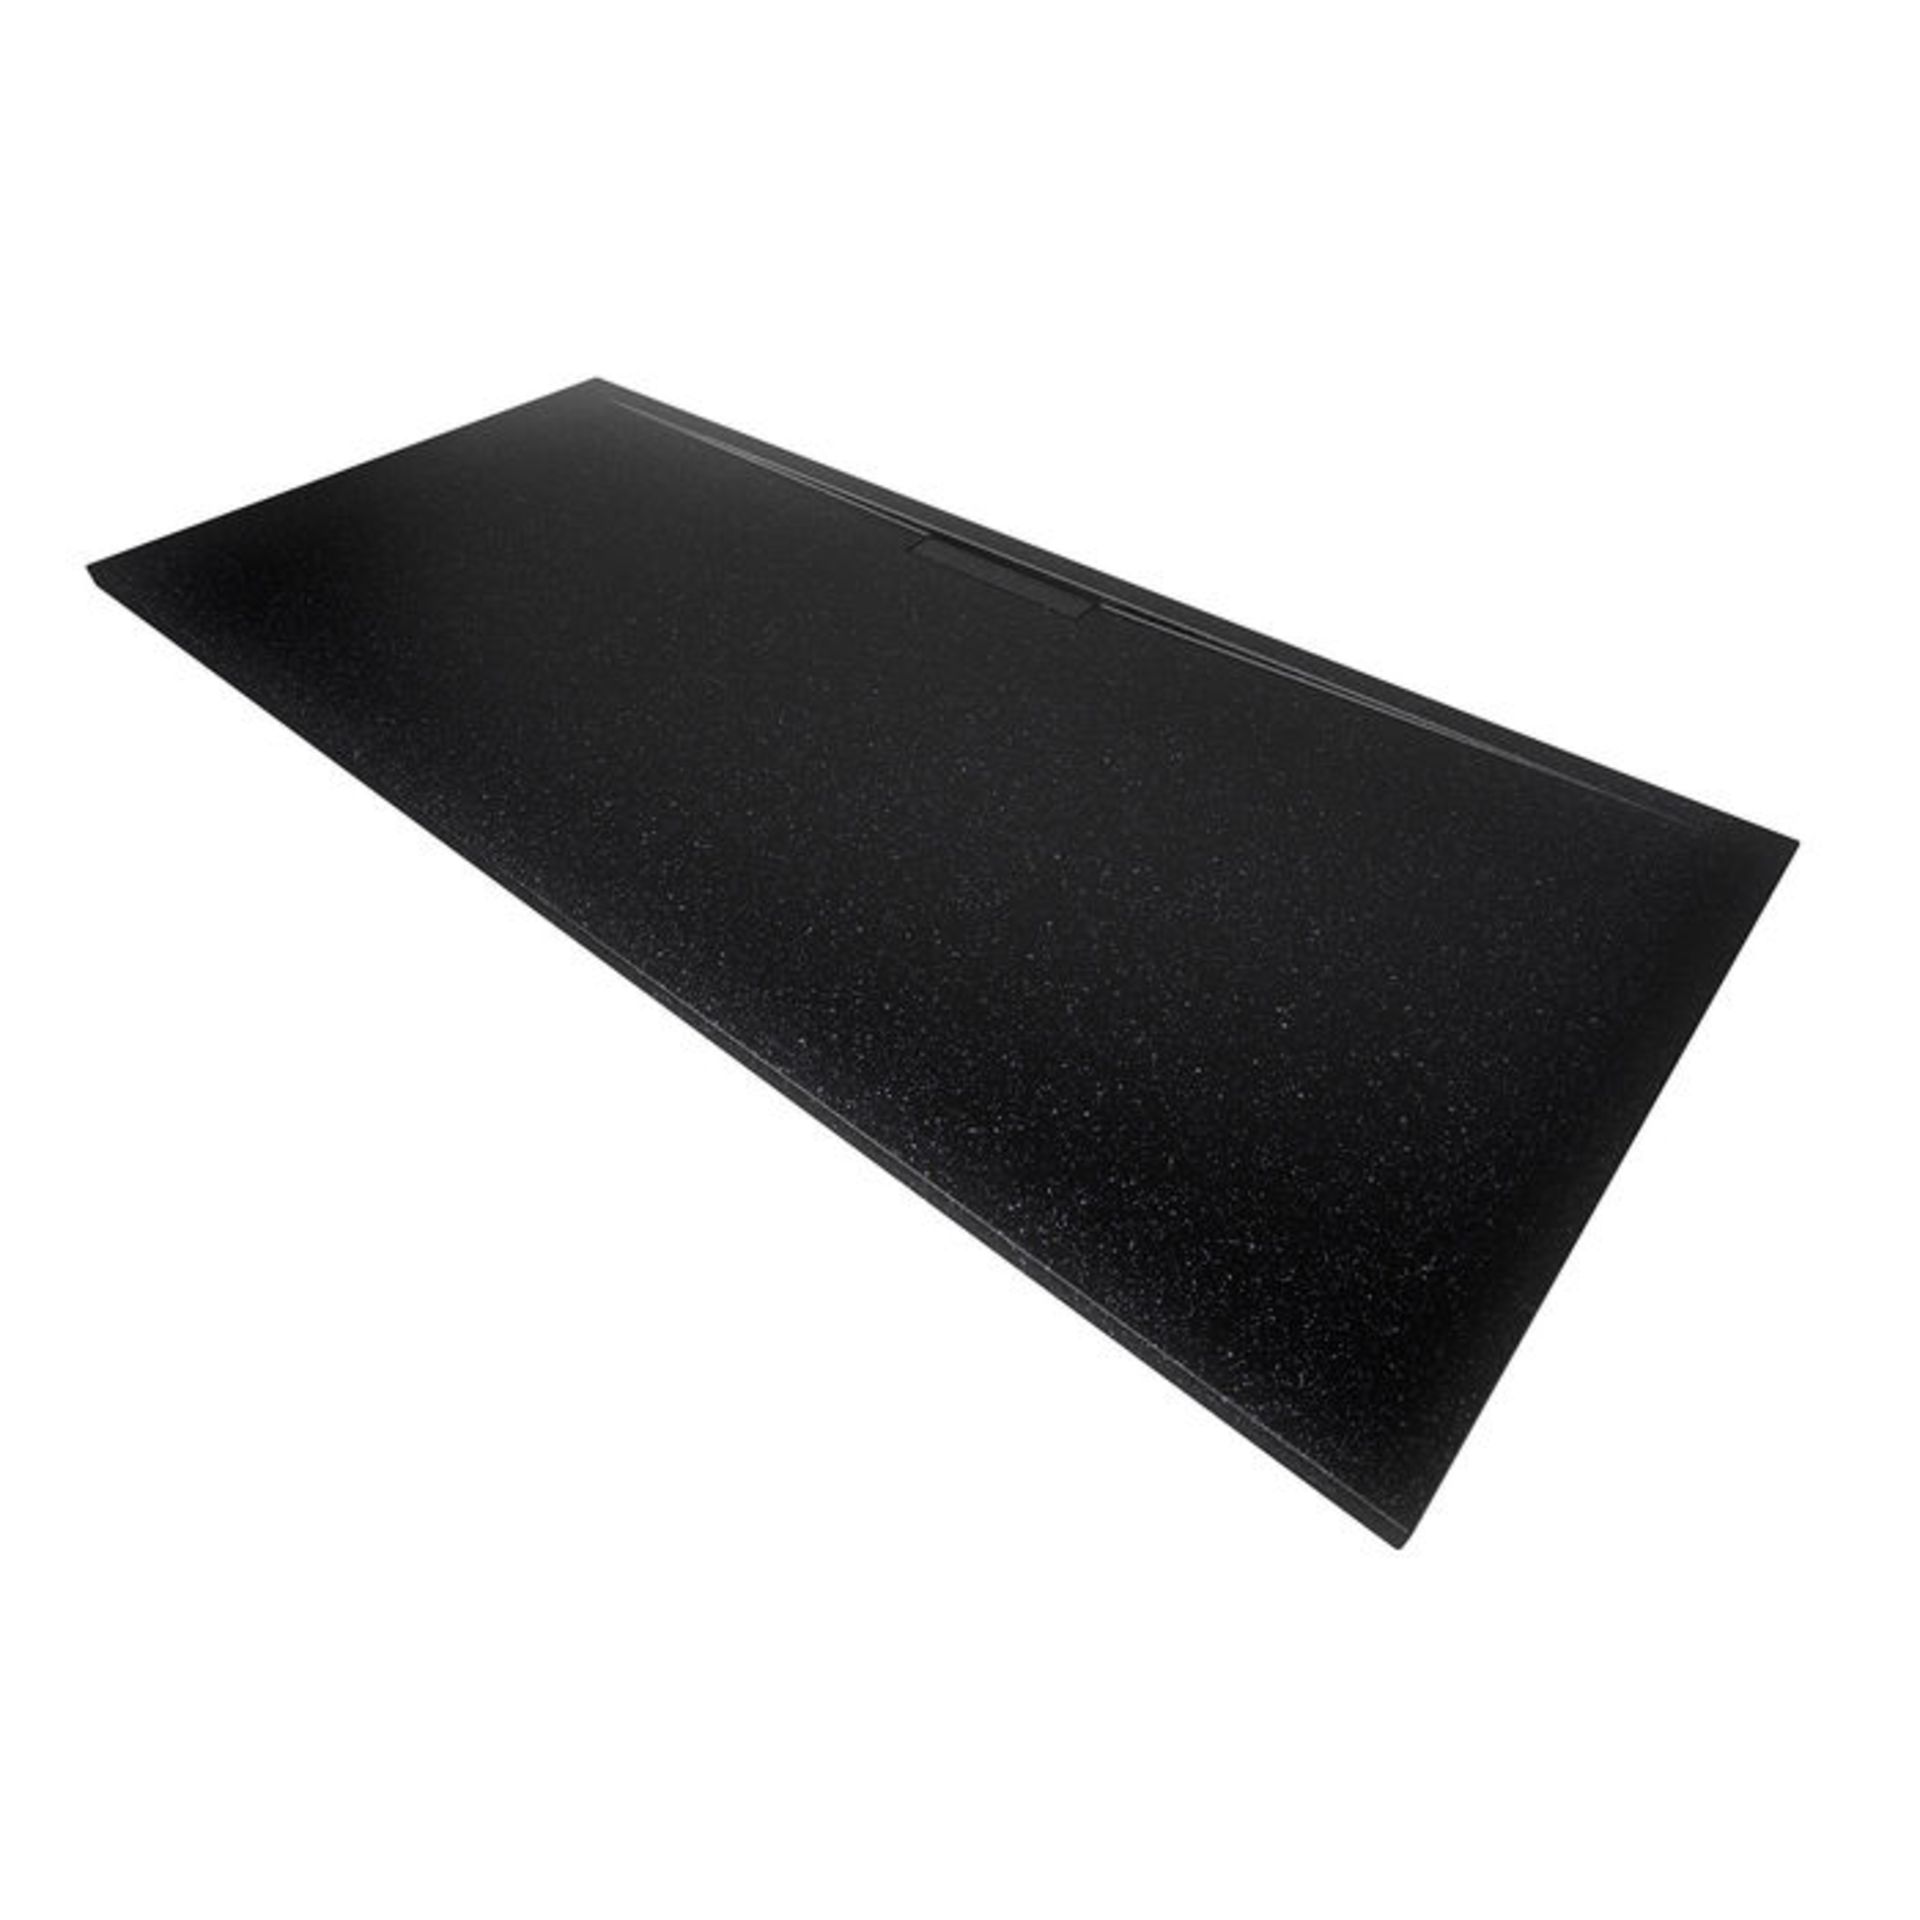 1200x800mm Luxe Ultra Slim Stone Shower Tray & Hidden Waste - Black. RRP £489.99. Manufactured in - Image 3 of 3